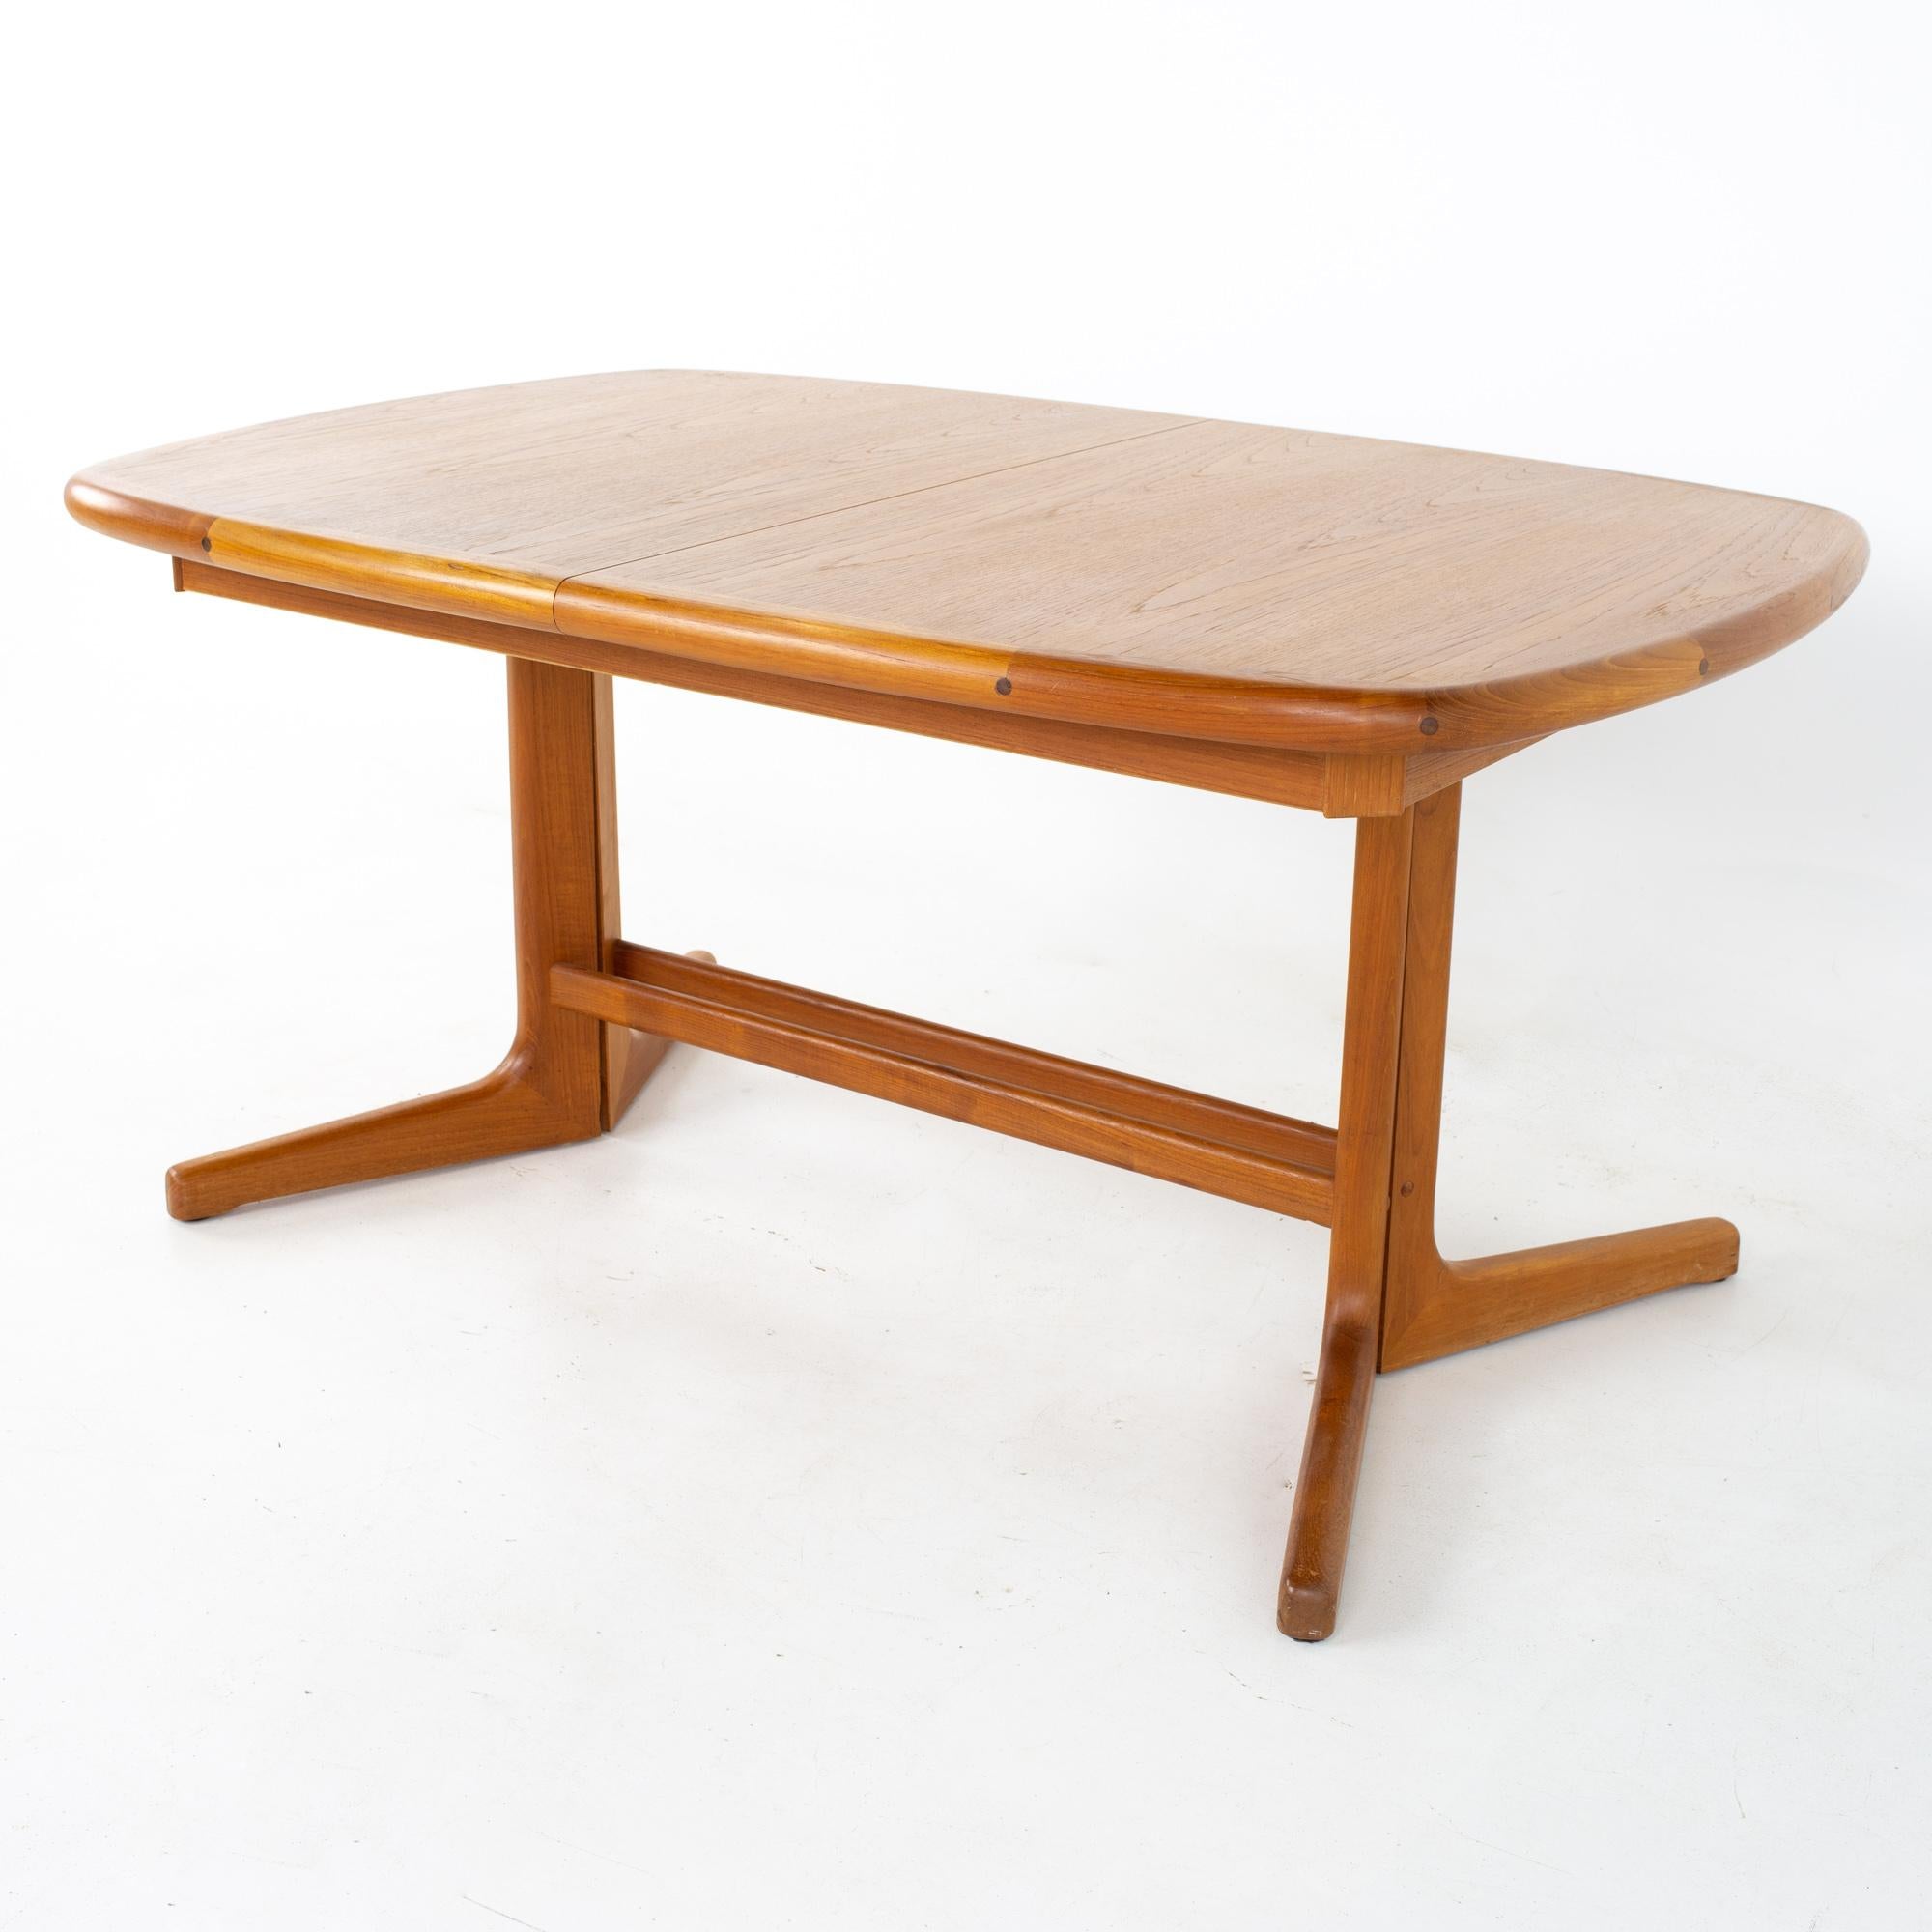 Mid century teak oval expanding dining table
Table measures: 58.75 wide x 38.25 deep x 28.25 inches high; each leaf is 19 inches wide, making a maximum table width of 96.75 inches when both leaves are used

All pieces of furniture can be had in